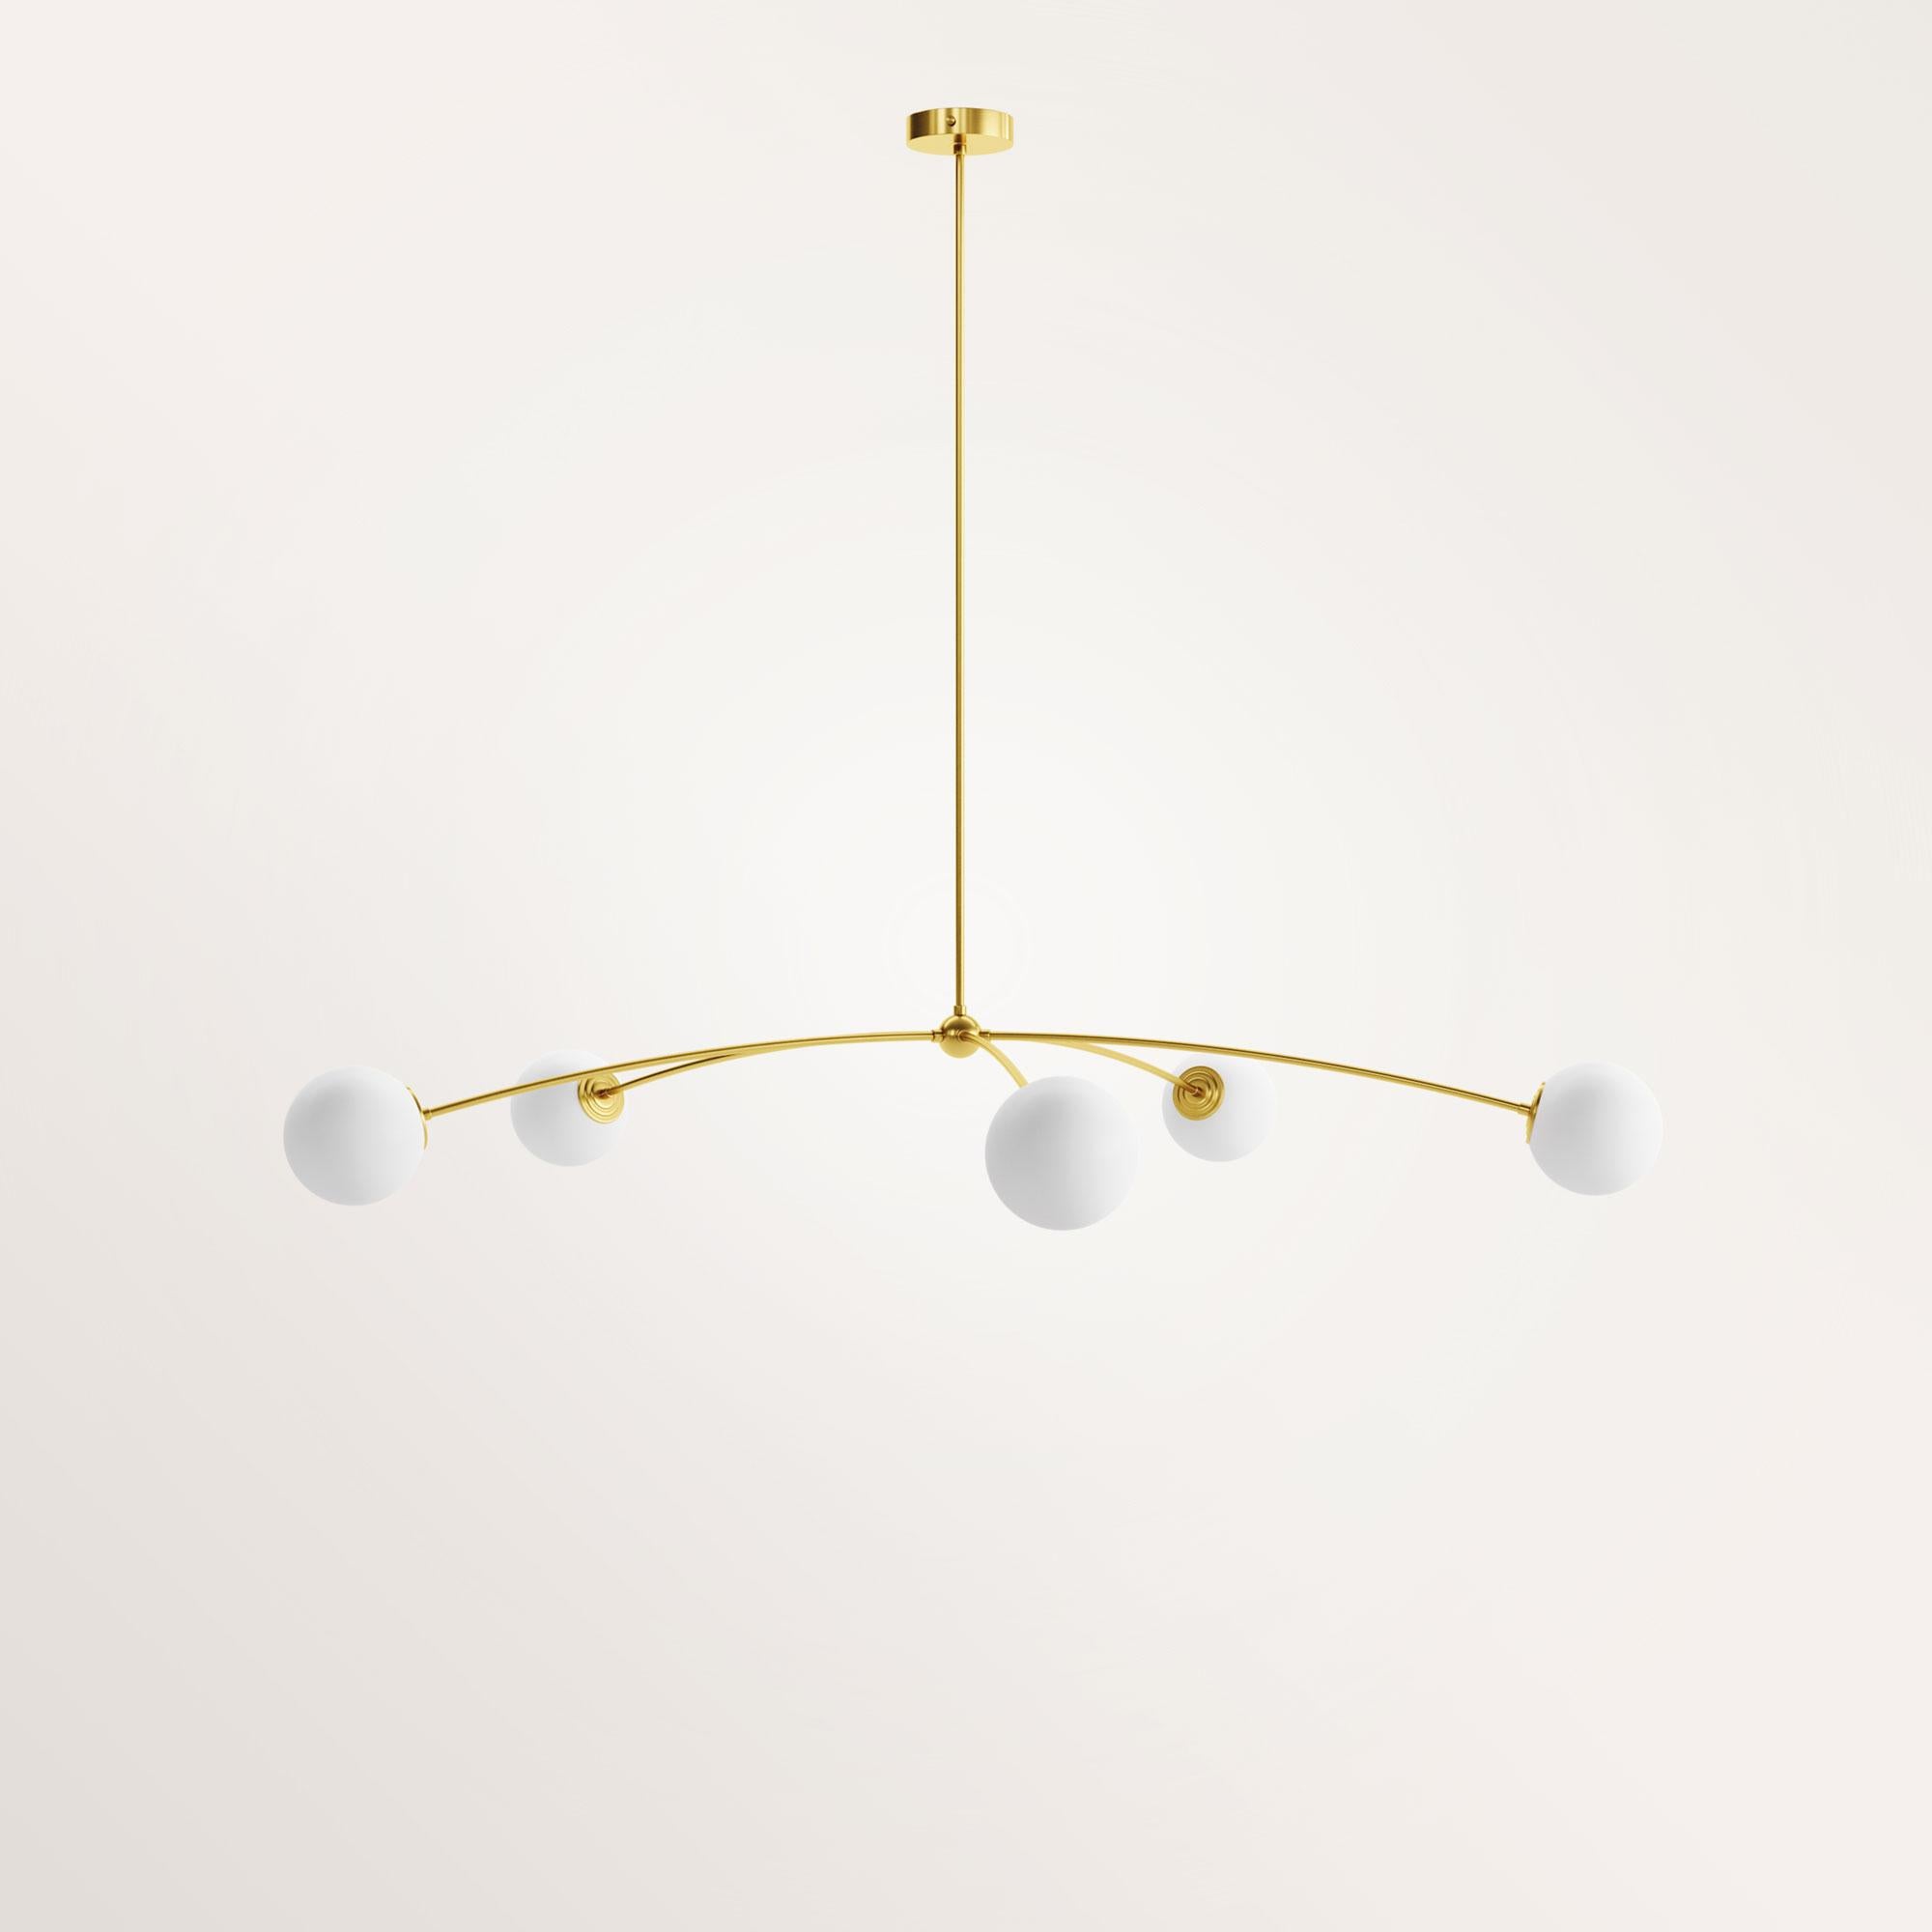 Handmade medium Eole II chandelier by Gobo Lights
Dimensions: D 120 x 100 H
Materials: Brass, opaline

Goddess of the fair anger, the revenge and the balance.

Self-taught and from the world of chemistry, this Belgian craftsman / designer